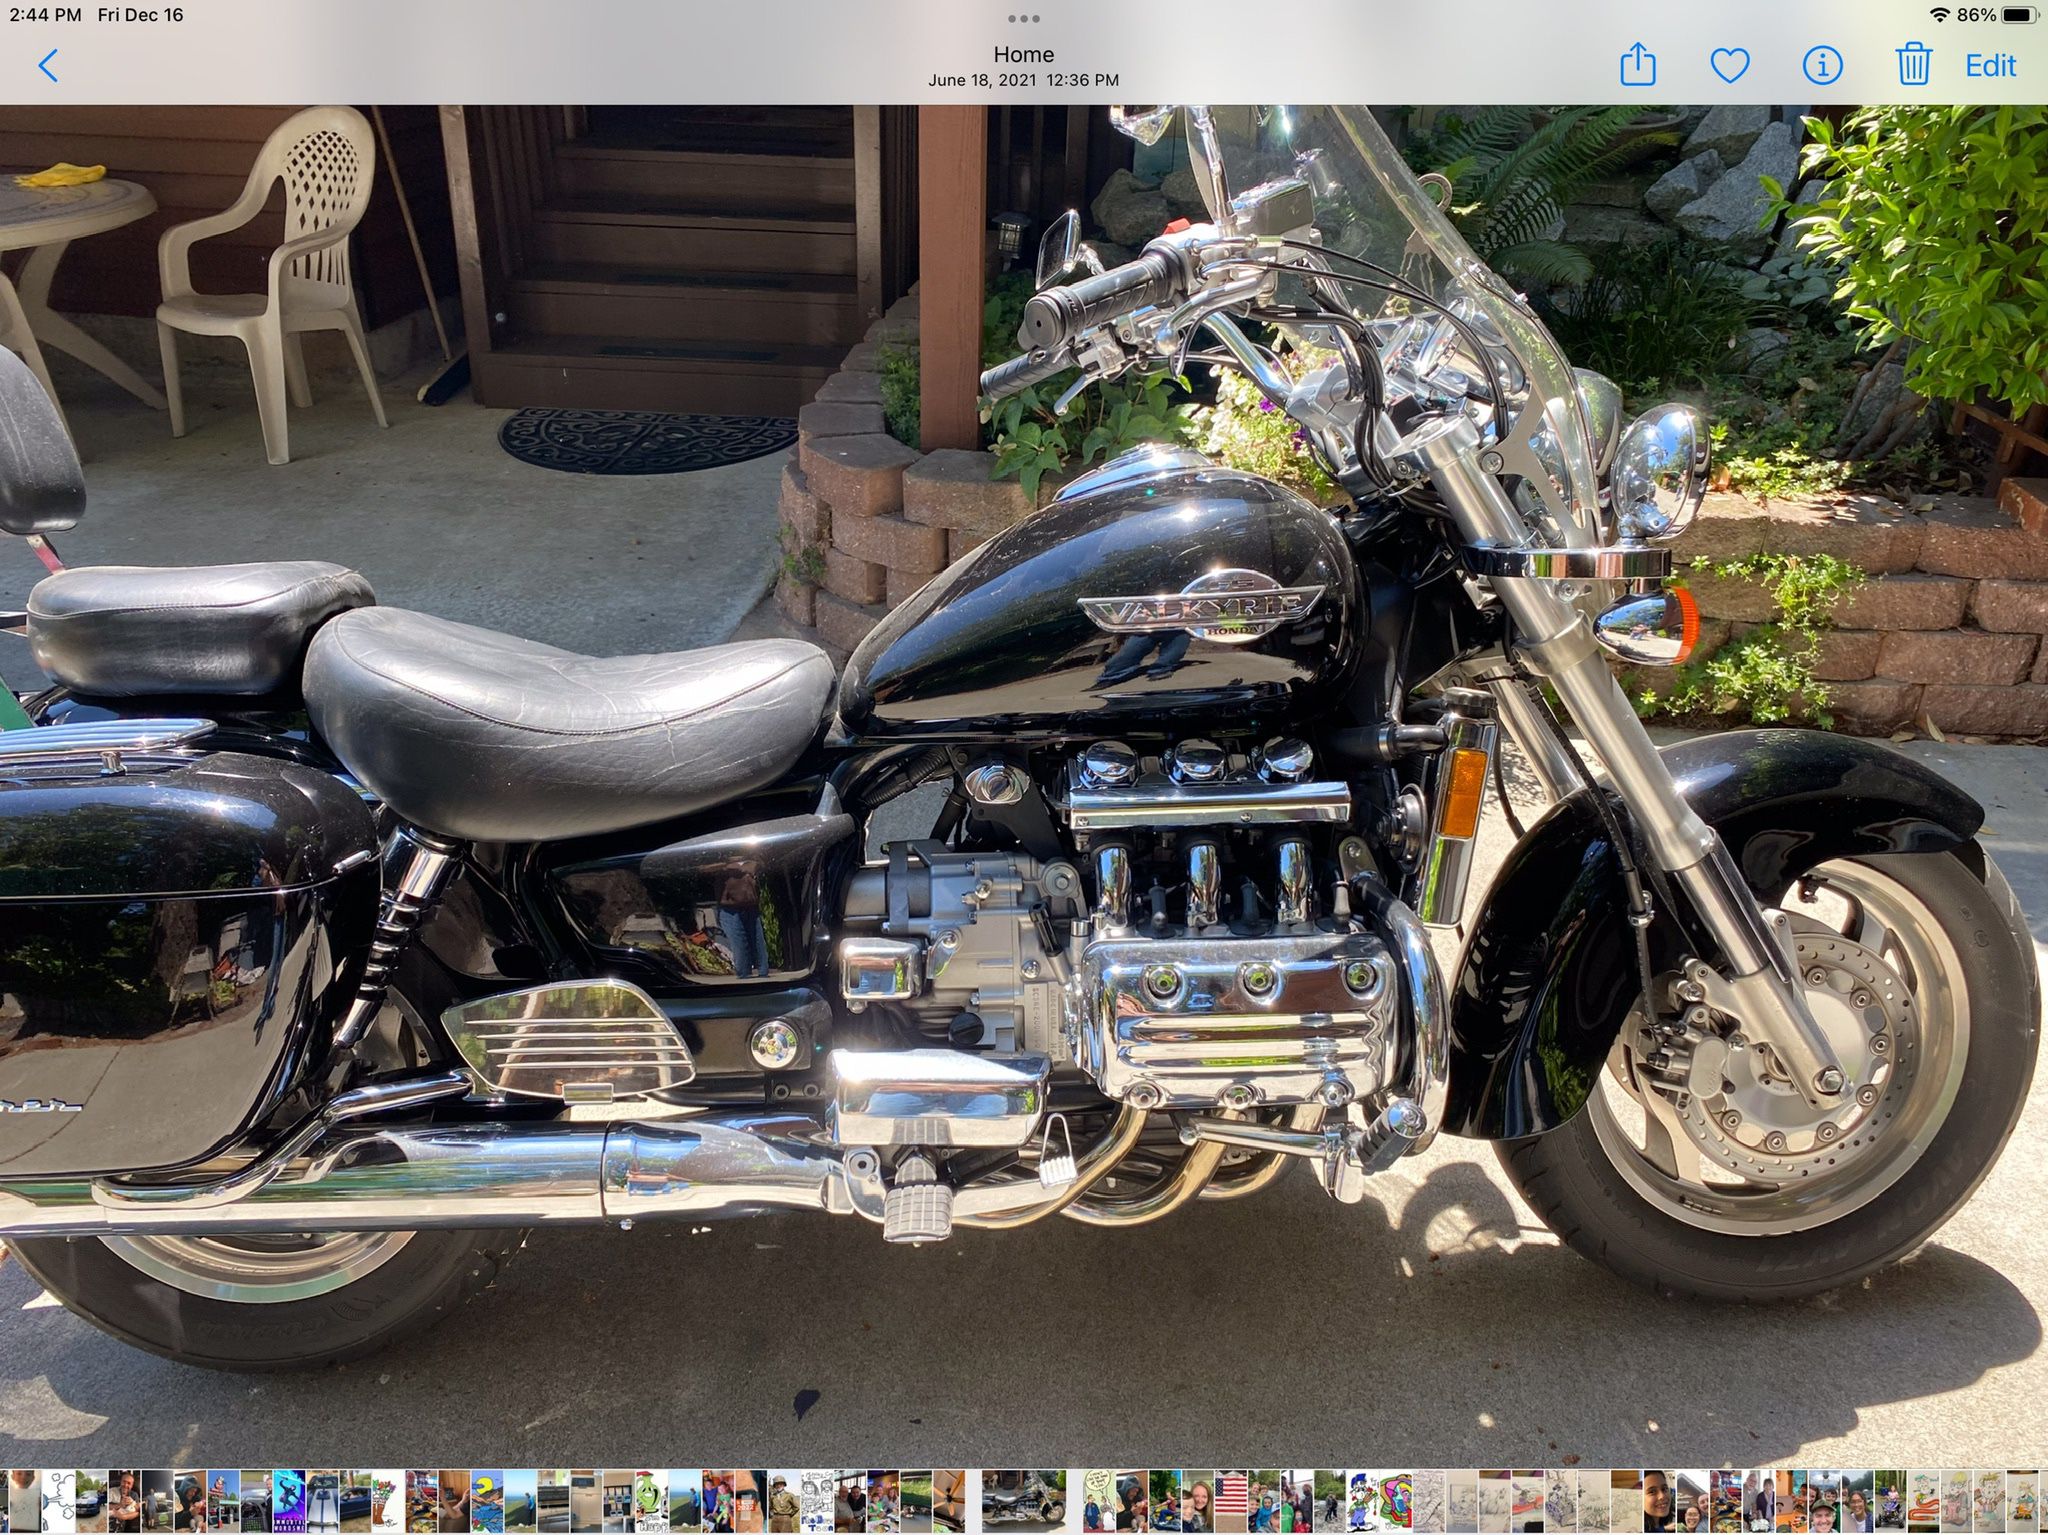 1997 HONDA Valkyrie 1500 Cc Great Running Bike I Just Can’t Ride Anymore